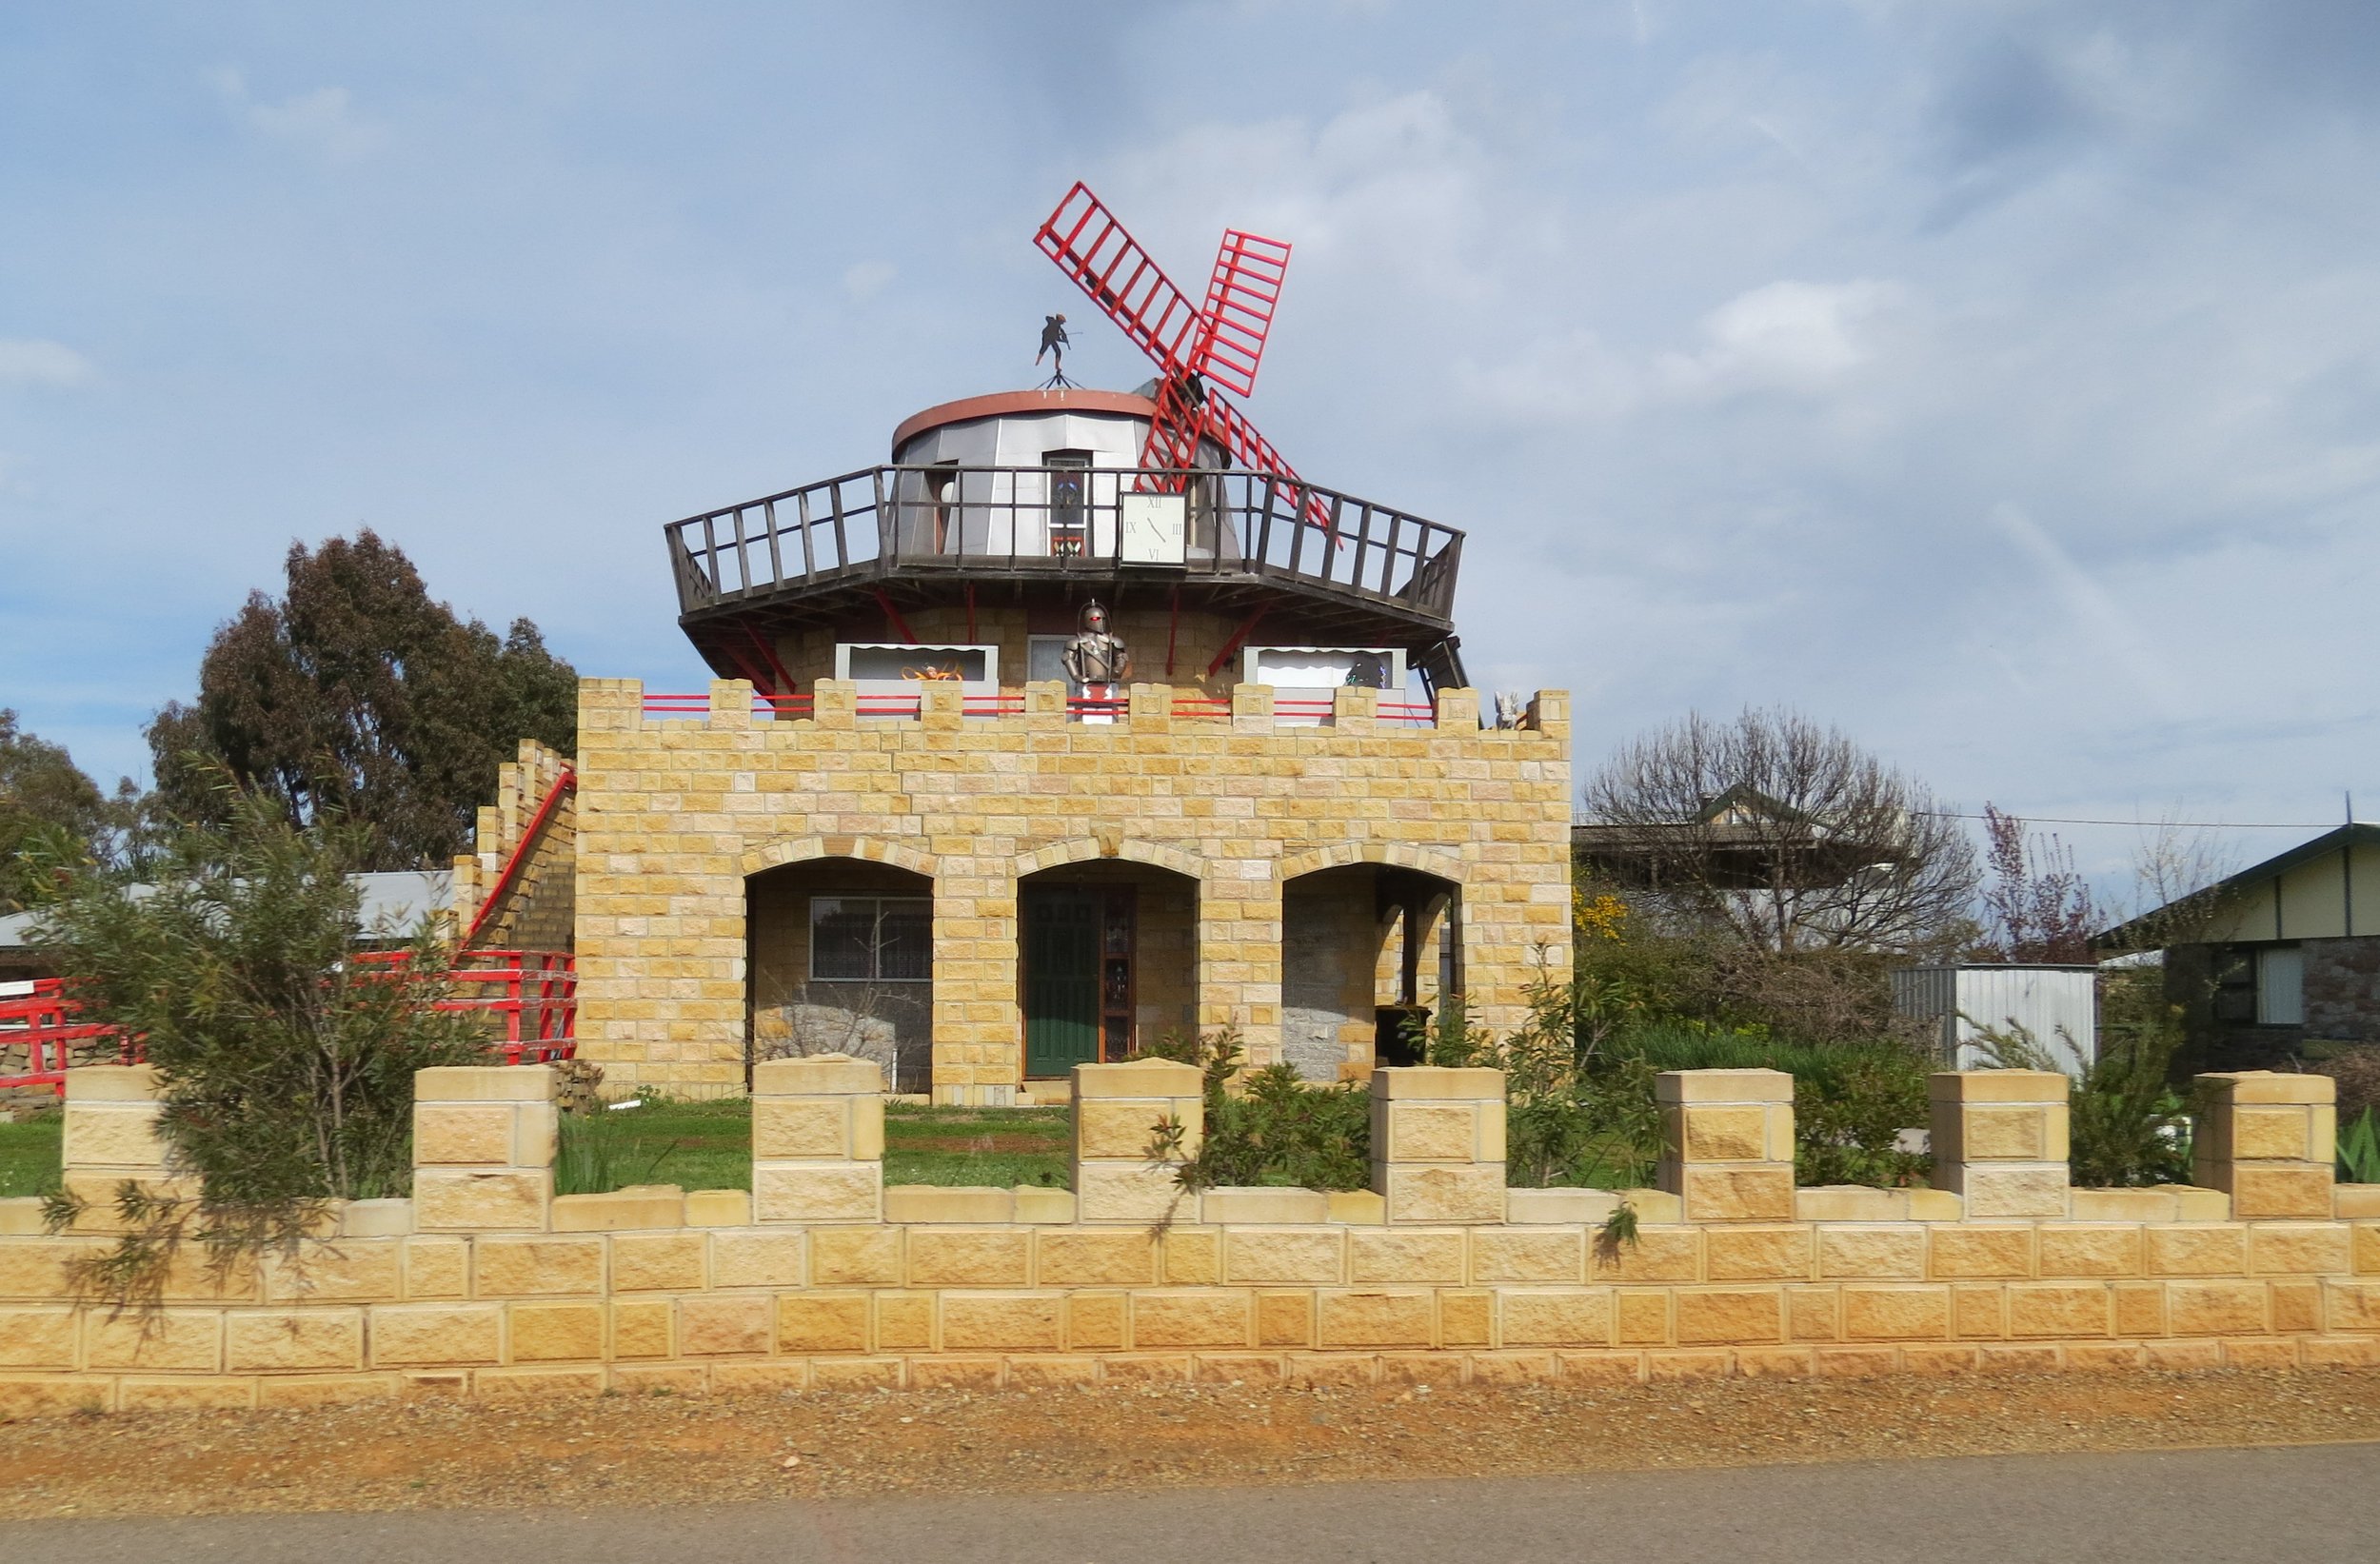 Windmill house with red-eyed knight